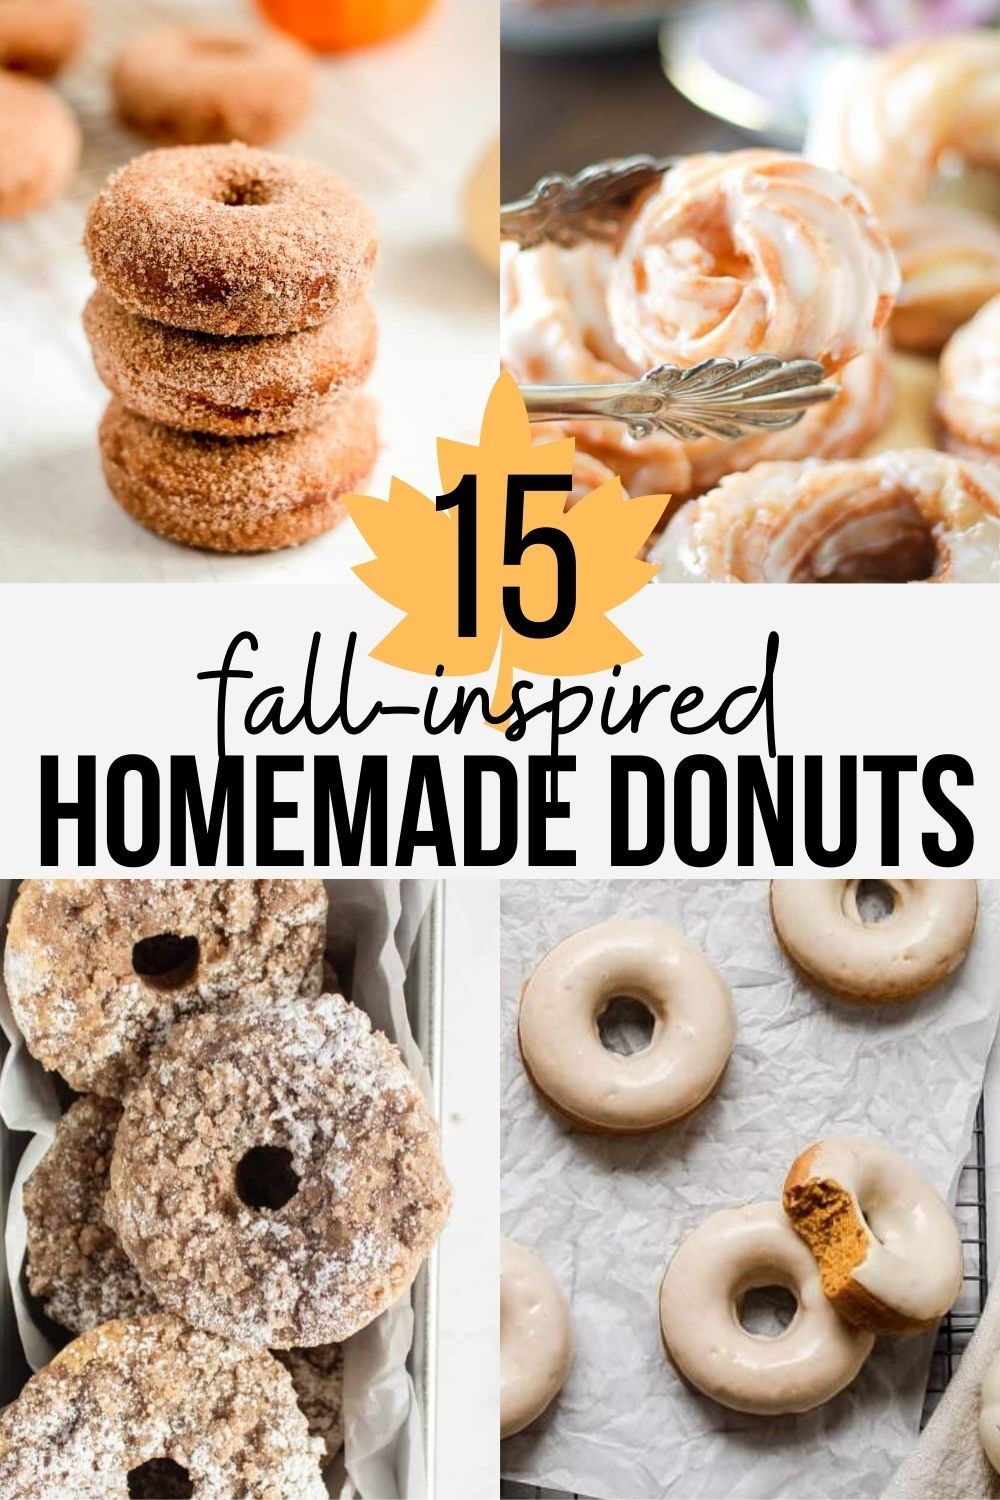 homemade donut recipes featuring pumpkin and other fall themed ingredients